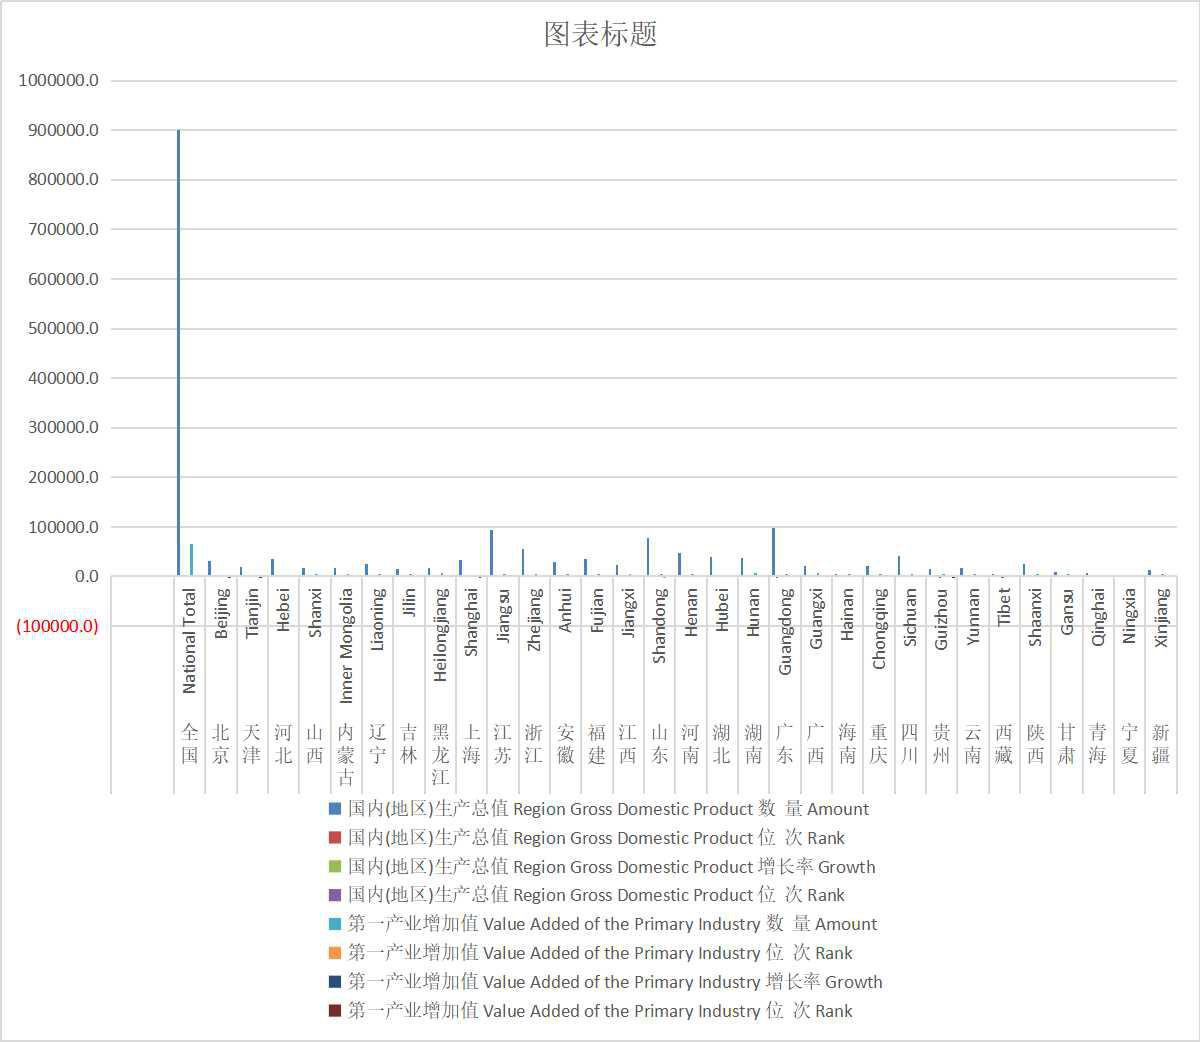 GDP and growth rate of all regions in China (2003-2018)